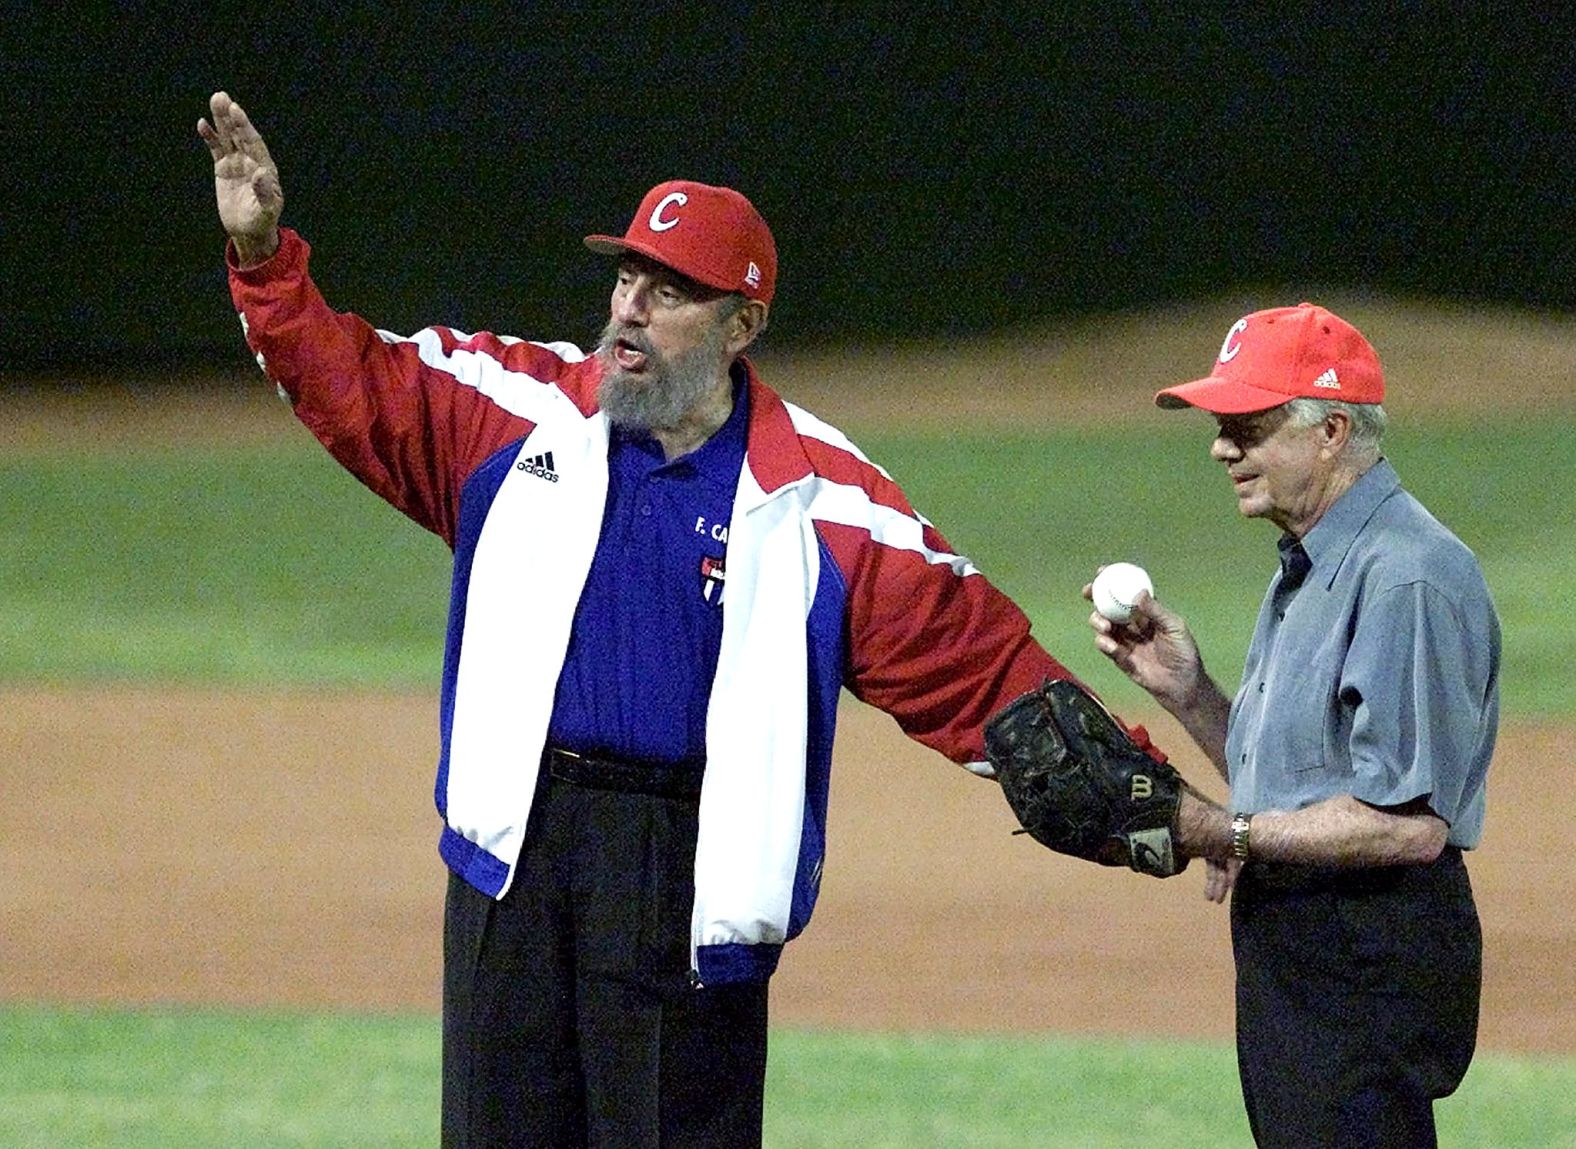 Cuban President Fidel Castro calls for time as Carter prepares to throw the first pitch at a baseball game in Havana, Cuba, in May 2002. It was the first time a US president, past or present, had visited Cuba since the 1959 Cuban Revolution.